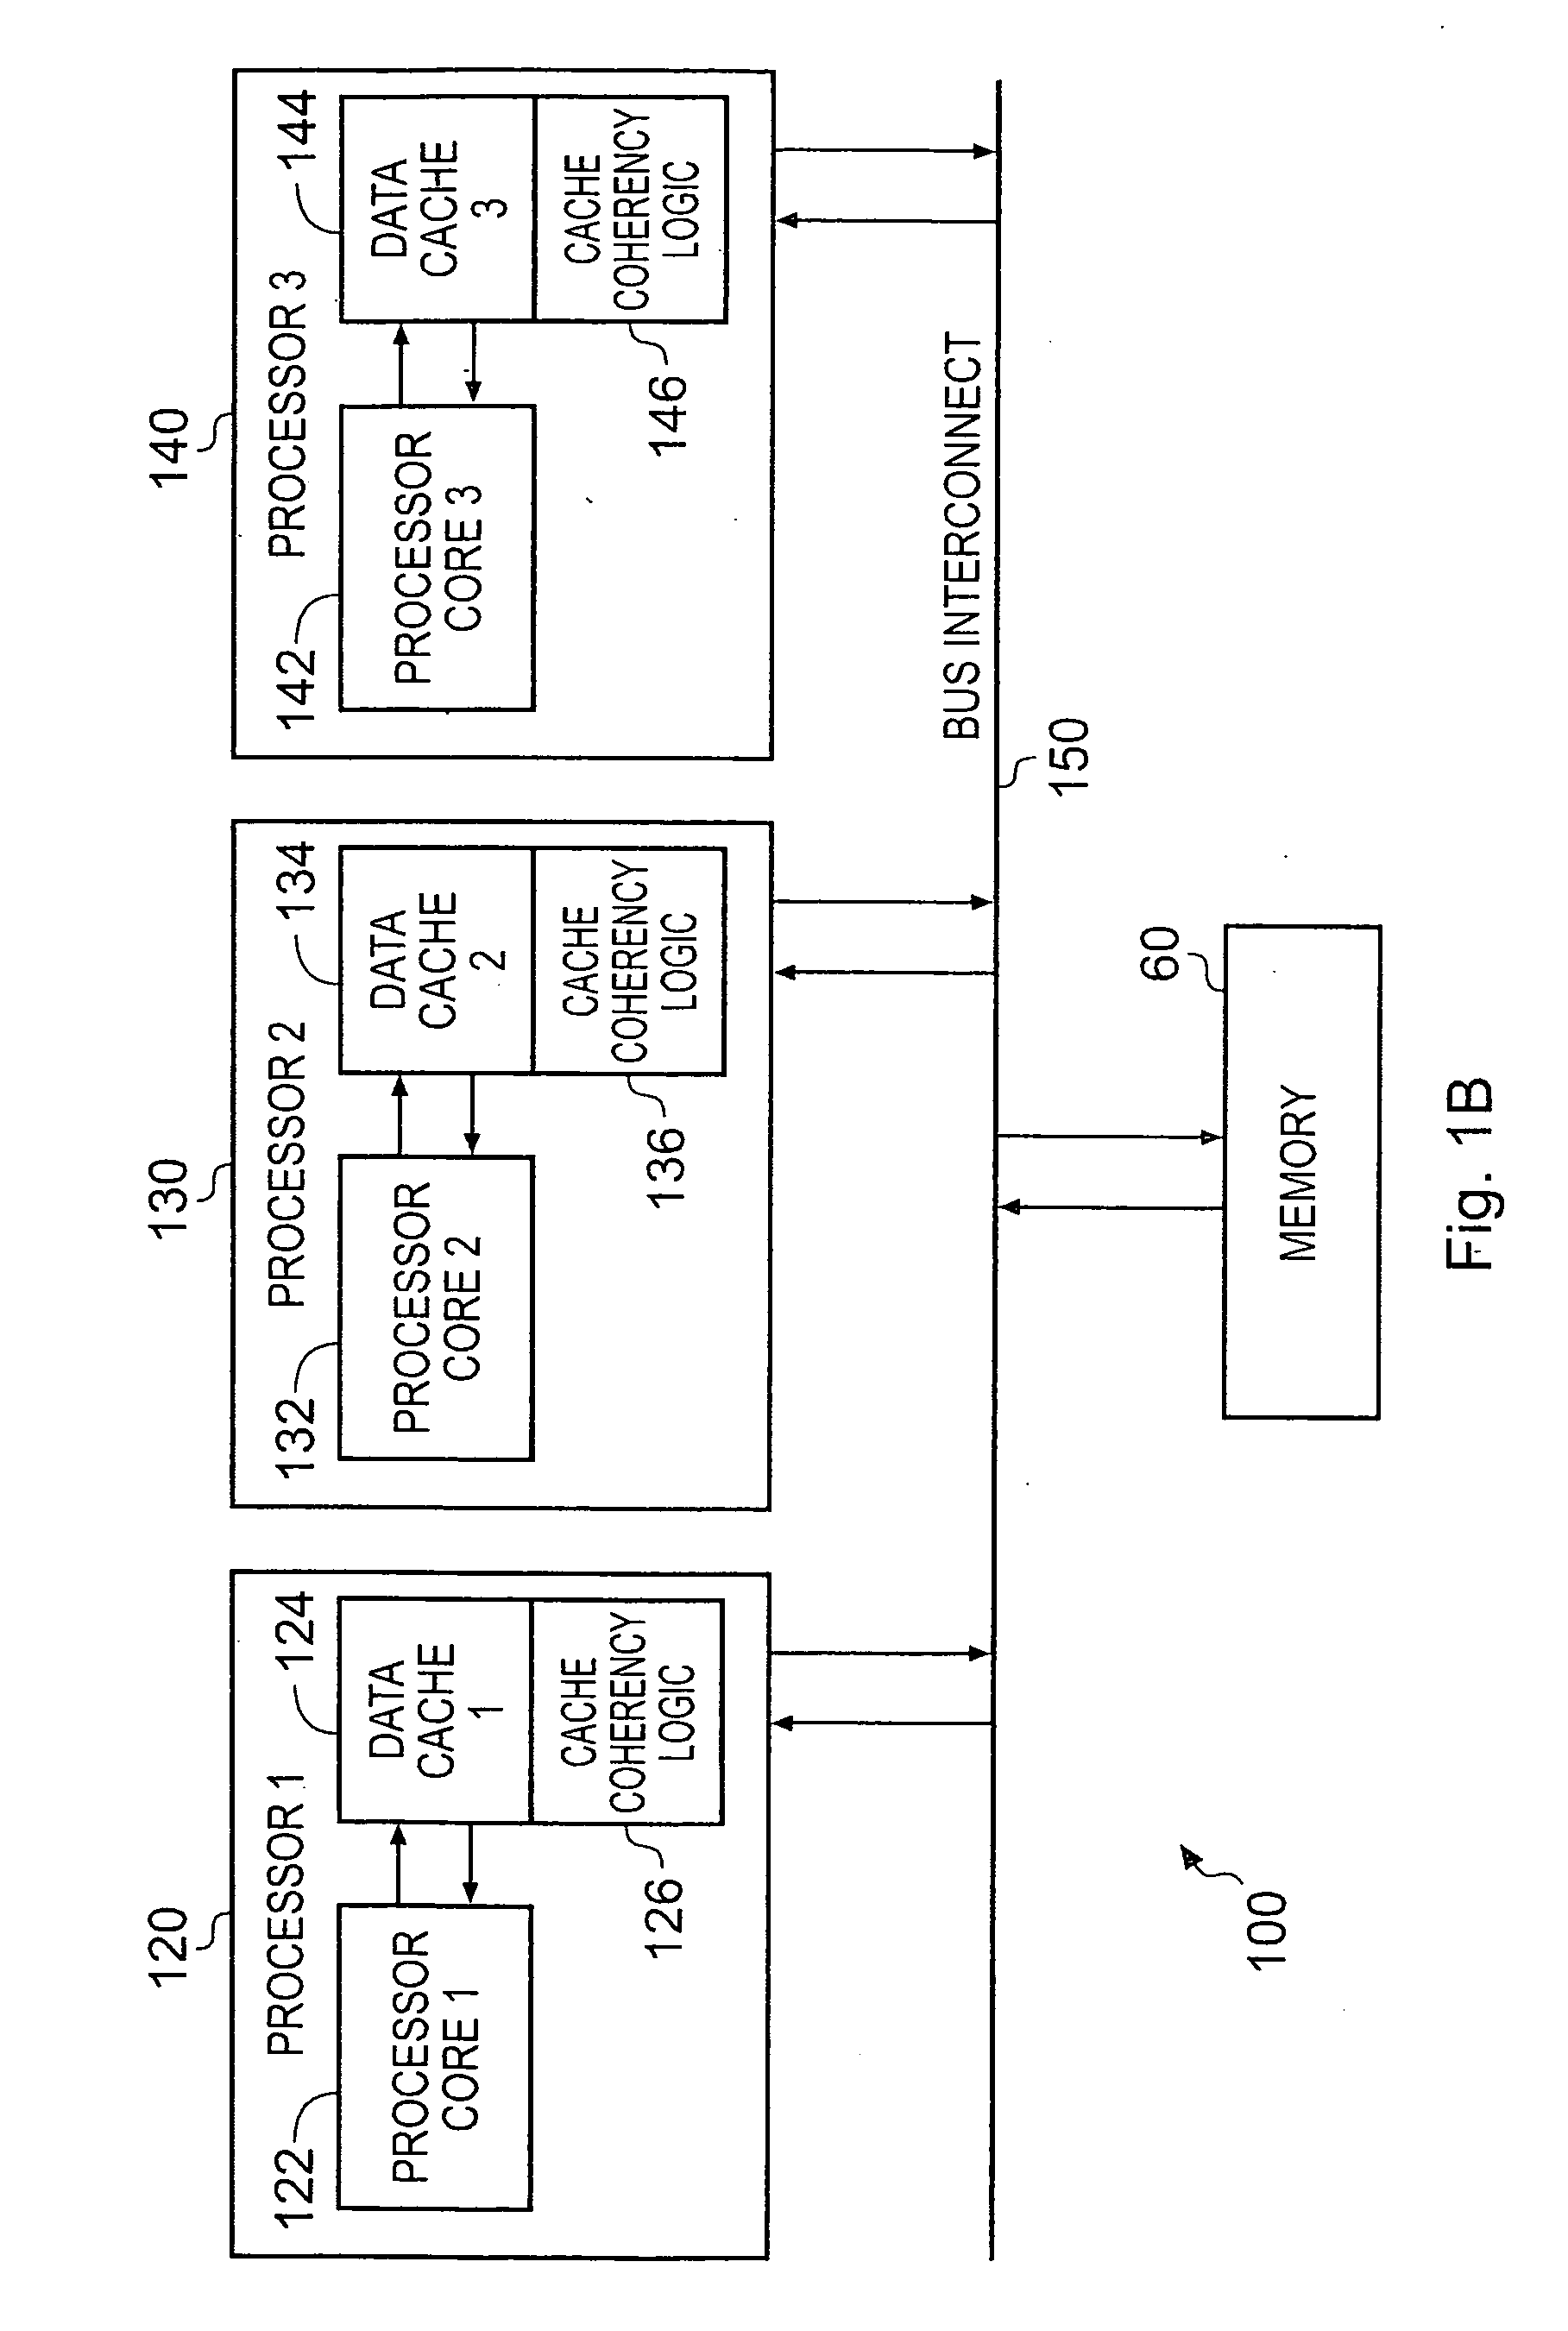 Handling of write access requests to shared memory in a data processing apparatus